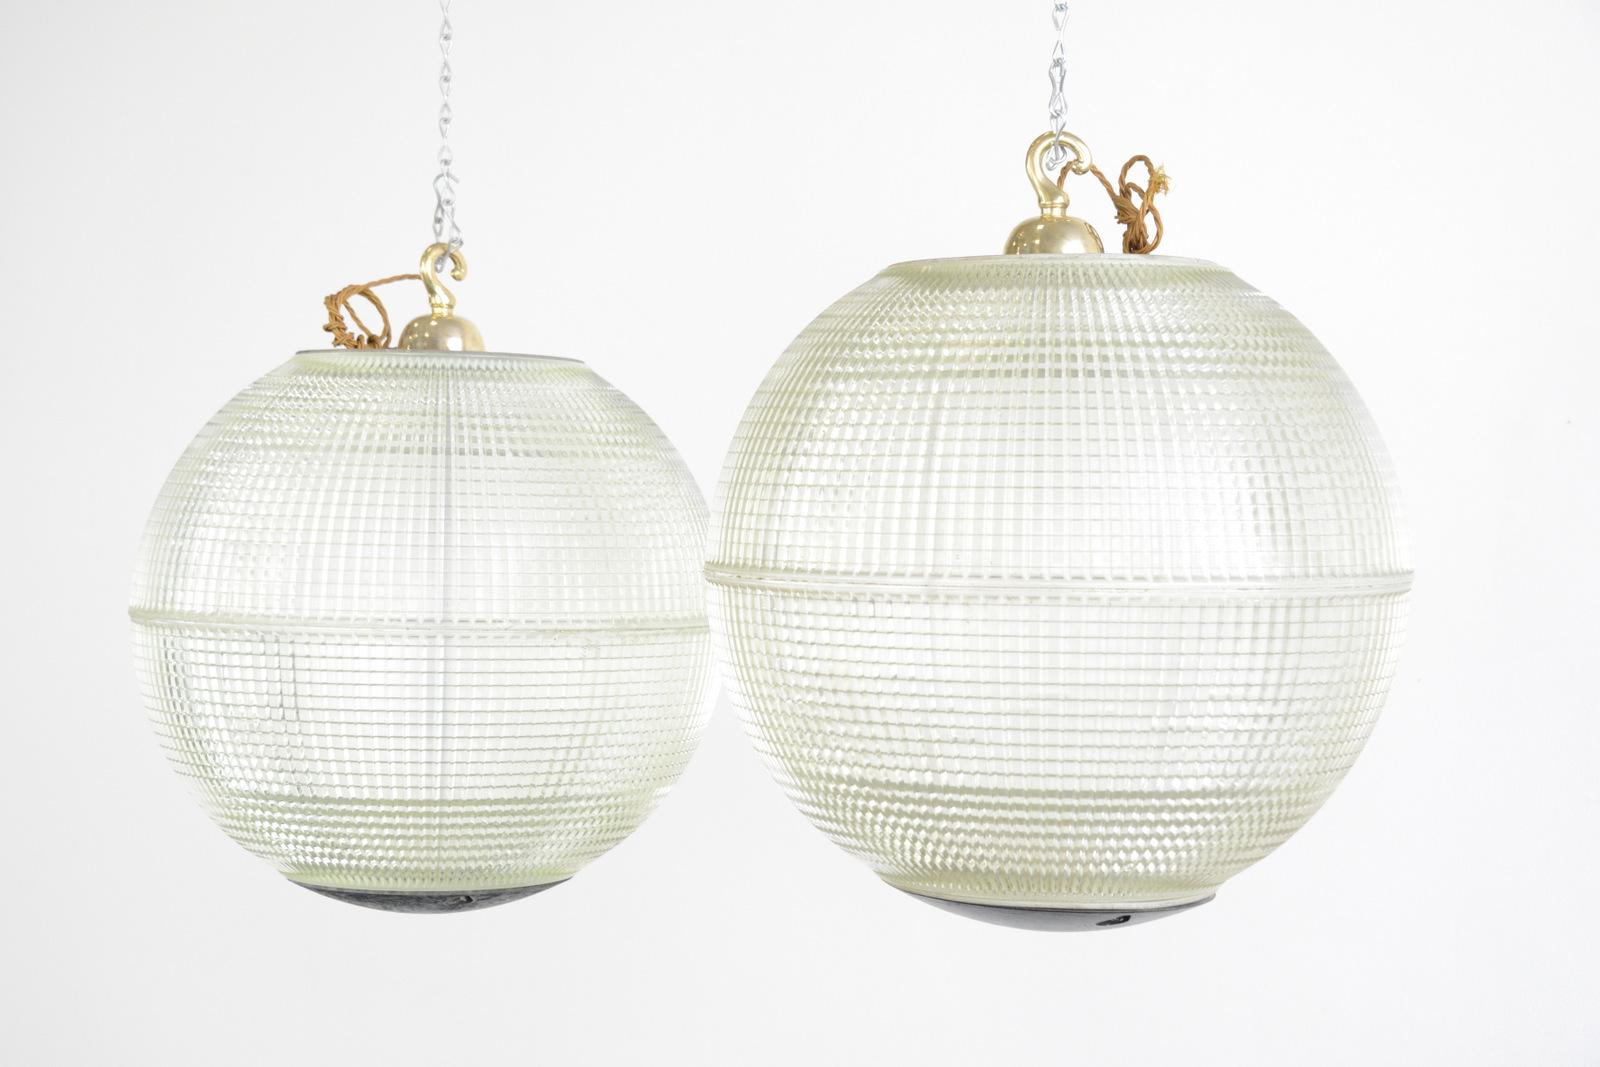 Parisian Holophane globe lights, circa 1950s

- Price is per light
- Heavy prismatic glass 
- Comes with chain and ceiling hook
- Takes E27 fitting bulbs
- Originally used on the tops of street lamps across Paris
- Made by Holophane,